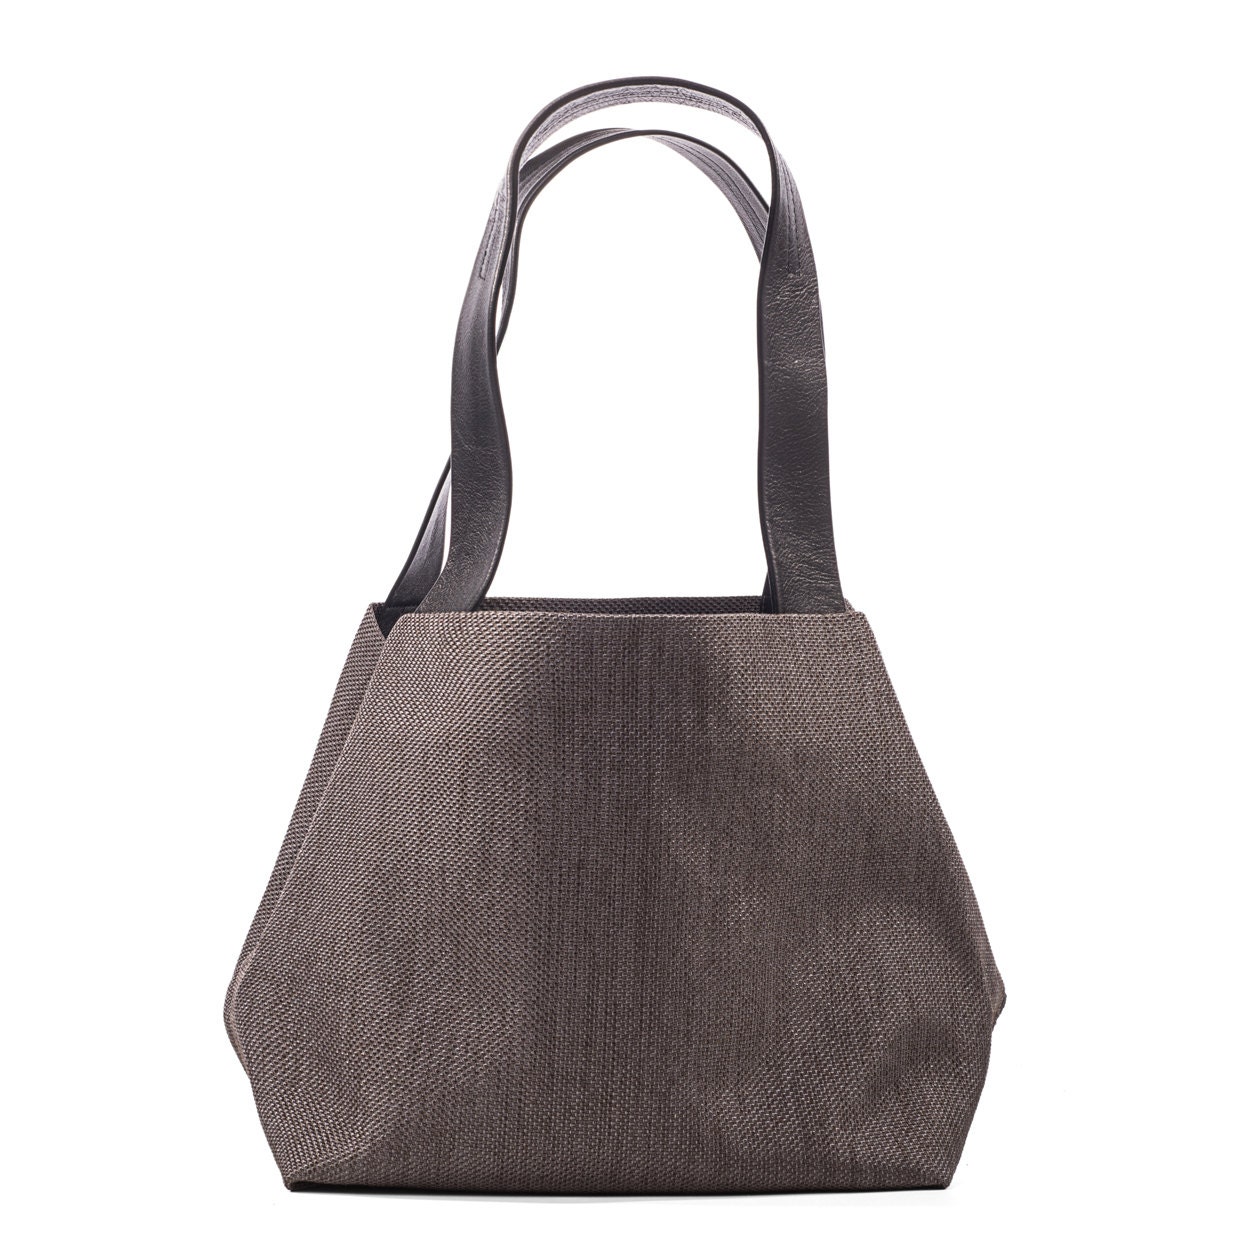 canvas tote with leather handles small canvas bag by KisimBags